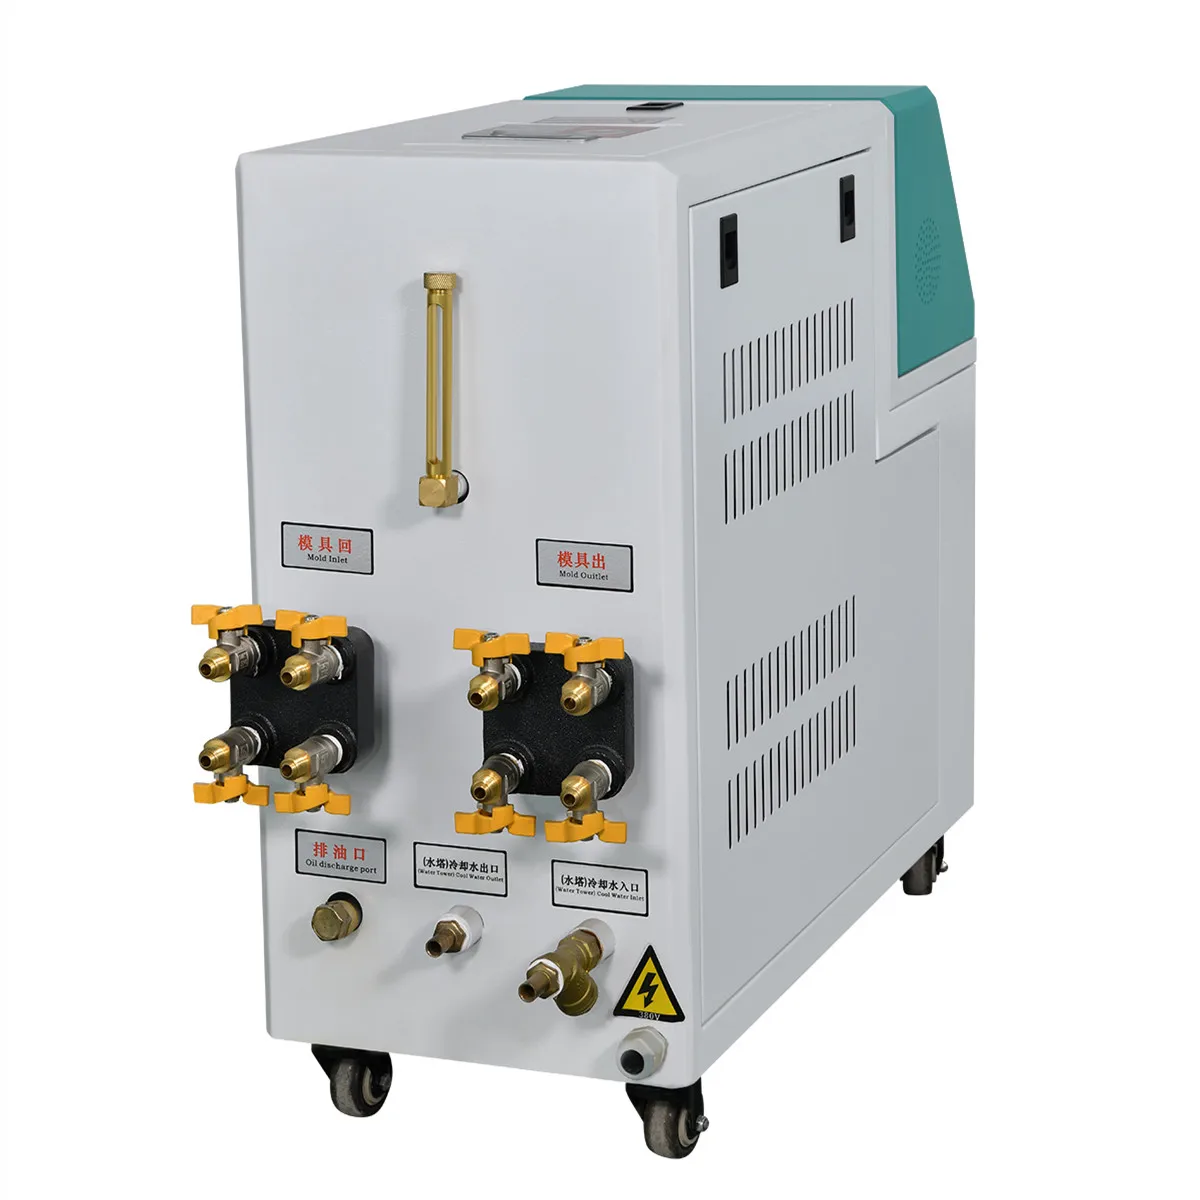 Oil Mold Temperature Controller water mould thermolator heating injectin die heater